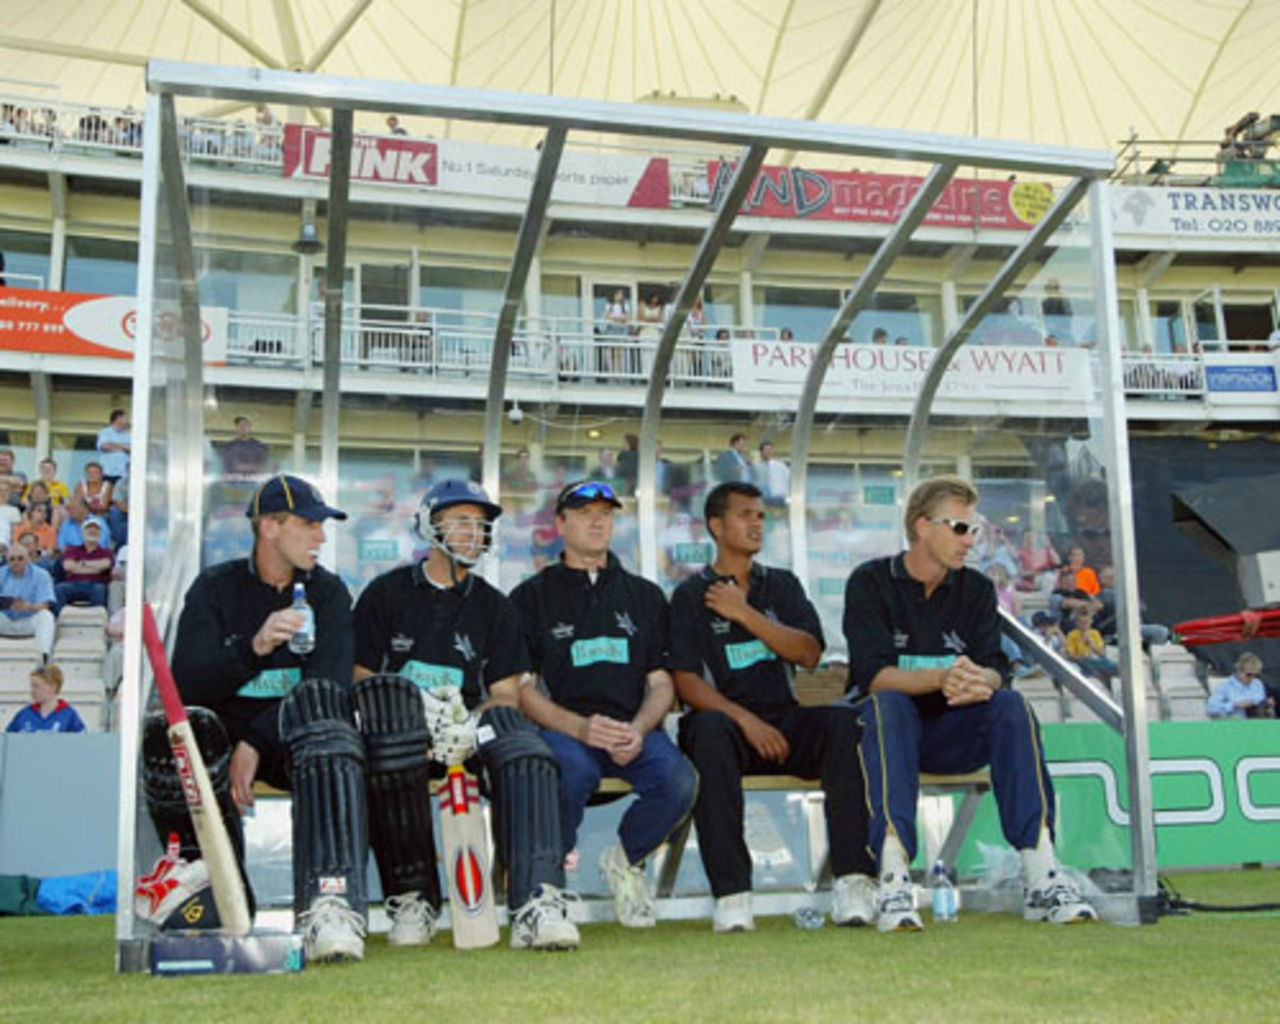 Hampshire players John Crawley, Simon Katich, Shaun Udal, Lawrence Prittipaul and Alan Mullally wait in the dugout during the Twenty20 Cup match between Hampshire and Sussex, Southampton, June 13, 2003 